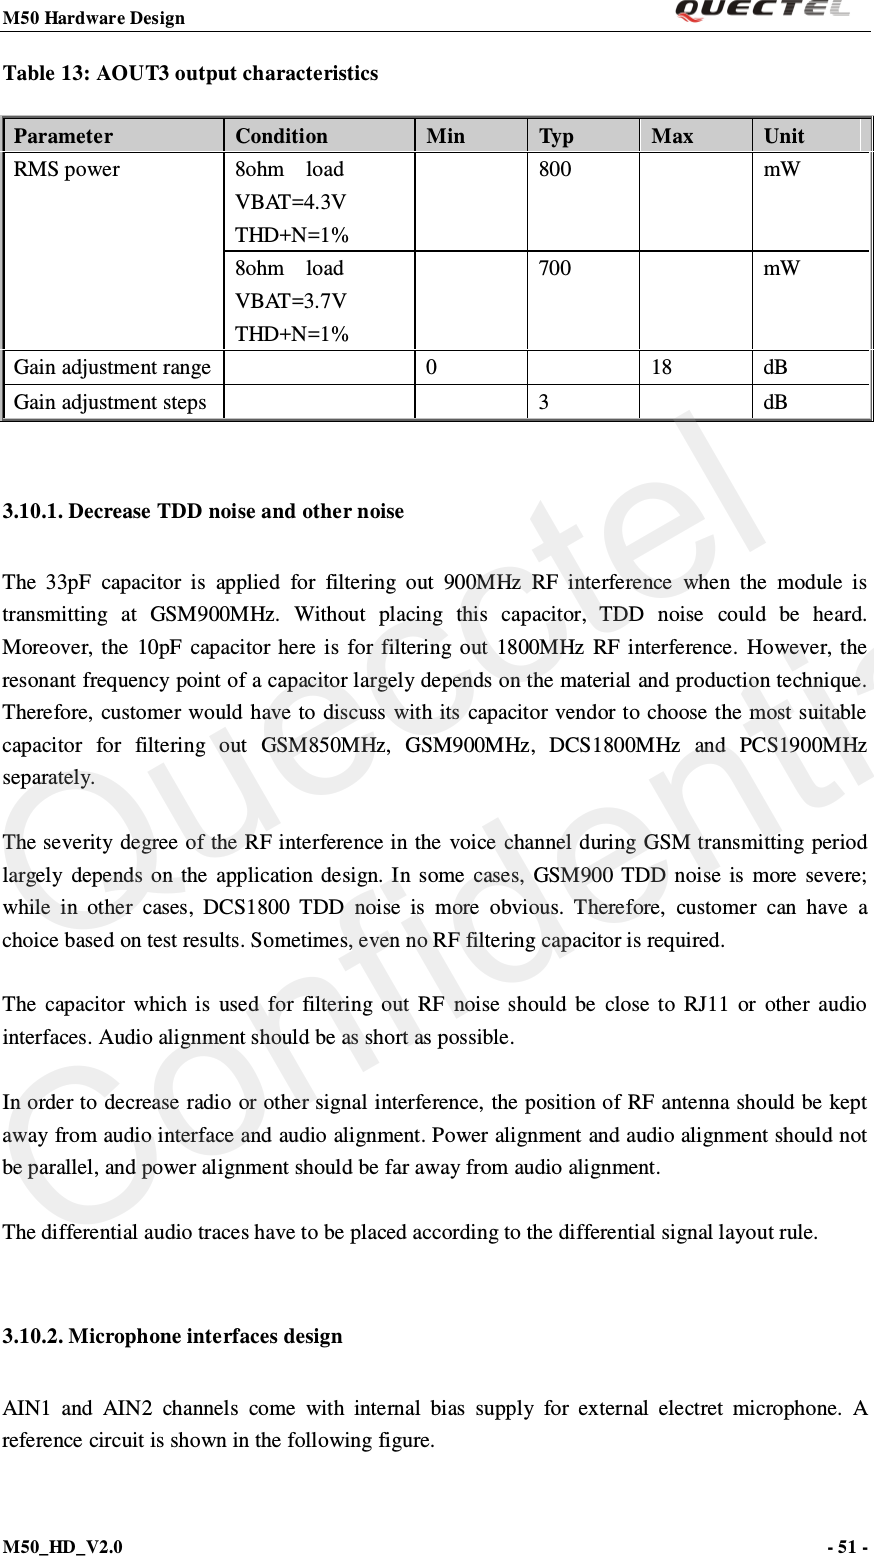 M50 Hardware Design                                                                M50_HD_V2.0                                                                      - 51 -   Table 13: AOUT3 output characteristics Parameter  Condition    Min Typ   Max  Unit RMS power 8ohm  load  VBAT=4.3V THD+N=1%  800    mW 8ohm  load  VBAT=3.7V   THD+N=1%  700    mW Gain adjustment range    0    18 dB Gain adjustment steps      3    dB  3.10.1. Decrease TDD noise and other noise The 33pF capacitor is applied for filtering out 900MHz RF interference when the module is transmitting at GSM900MHz. Without placing this capacitor, TDD noise could be heard. Moreover, the 10pF capacitor here is for filtering out 1800MHz RF interference. However, the resonant frequency point of a capacitor largely depends on the material and production technique. Therefore, customer would have to discuss with its capacitor vendor to choose the most suitable capacitor for filtering out  GSM850MHz, GSM900MHz, DCS1800MHz and PCS1900MHz separately.    The severity degree of the RF interference in the voice channel during GSM transmitting period largely depends on the application design. In some cases, GSM900 TDD noise is more severe; while in other cases, DCS1800 TDD noise is more obvious. Therefore, customer can have a choice based on test results. Sometimes, even no RF filtering capacitor is required.  The capacitor which is used for filtering out  RF noise should be close to RJ11 or other audio interfaces. Audio alignment should be as short as possible.  In order to decrease radio or other signal interference, the position of RF antenna should be kept away from audio interface and audio alignment. Power alignment and audio alignment should not be parallel, and power alignment should be far away from audio alignment.  The differential audio traces have to be placed according to the differential signal layout rule.    3.10.2. Microphone interfaces design AIN1 and AIN2 channels come with internal bias supply for external electret microphone. A reference circuit is shown in the following figure.   Quecctel Confidential